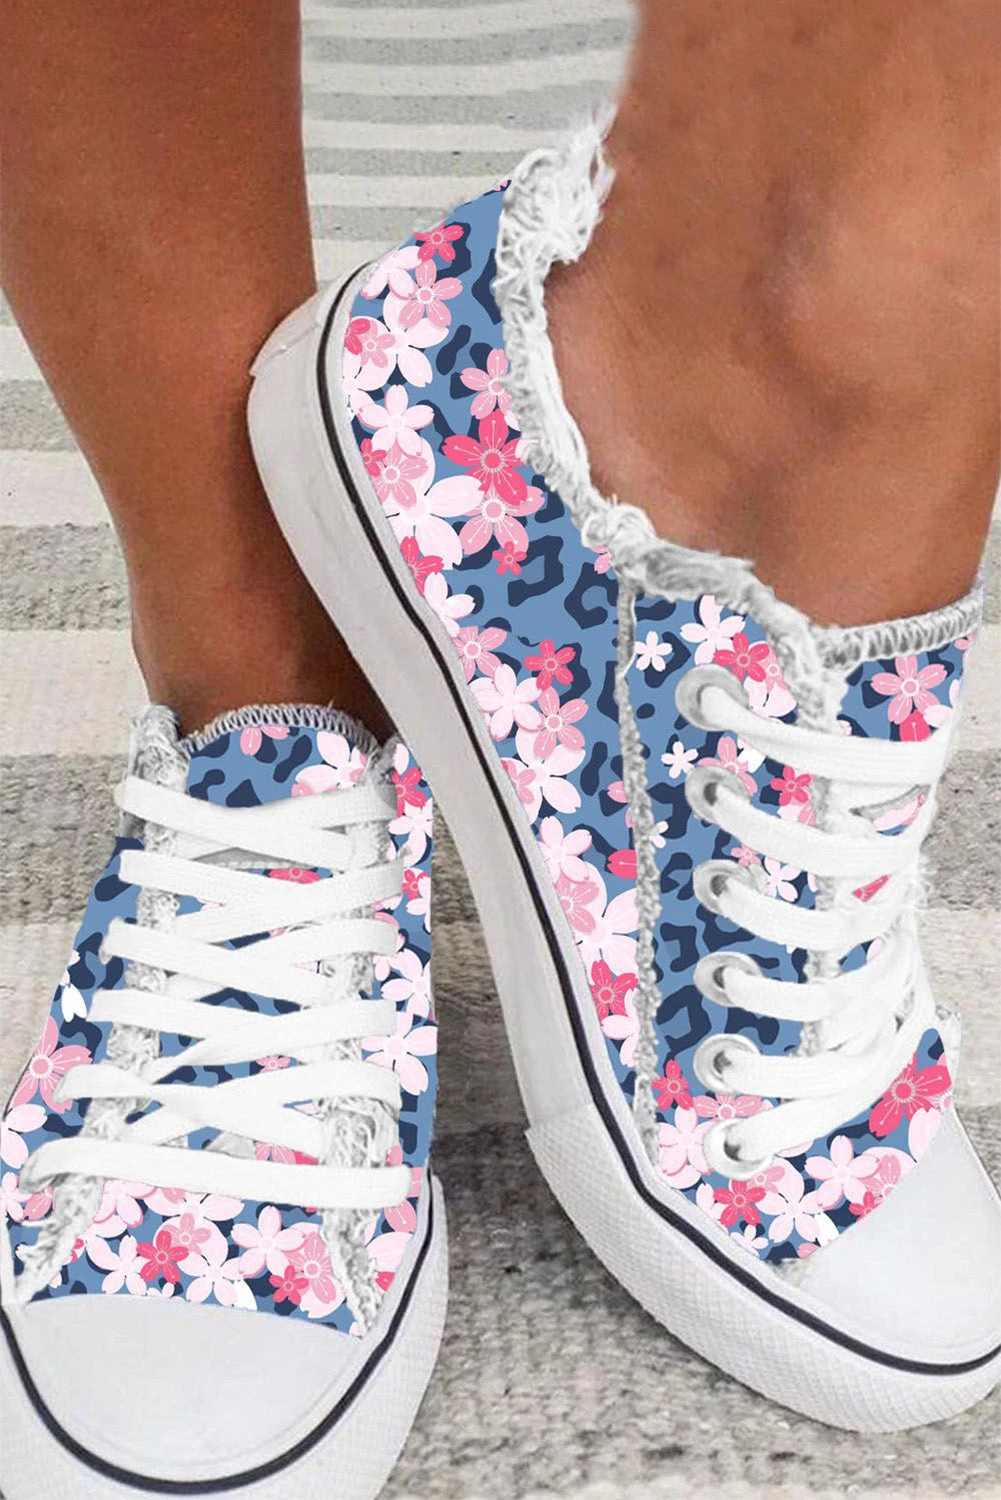 Leopard Cherry Blossom Canvas Shoes $ 37.99 - Evaless